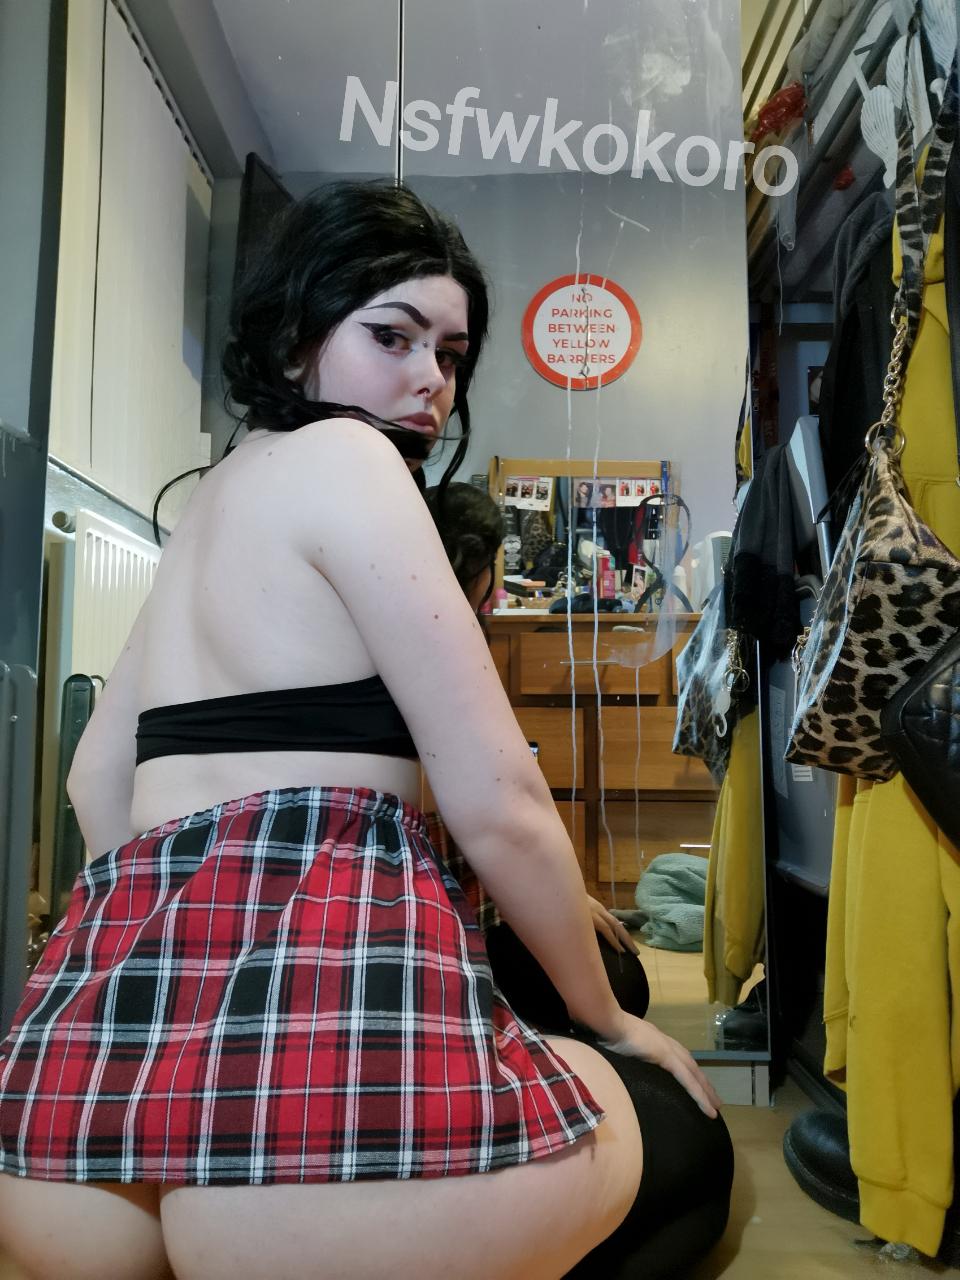 The Skirt Gets Higher With Every Upvote My Dms Are Wide Open Dadd